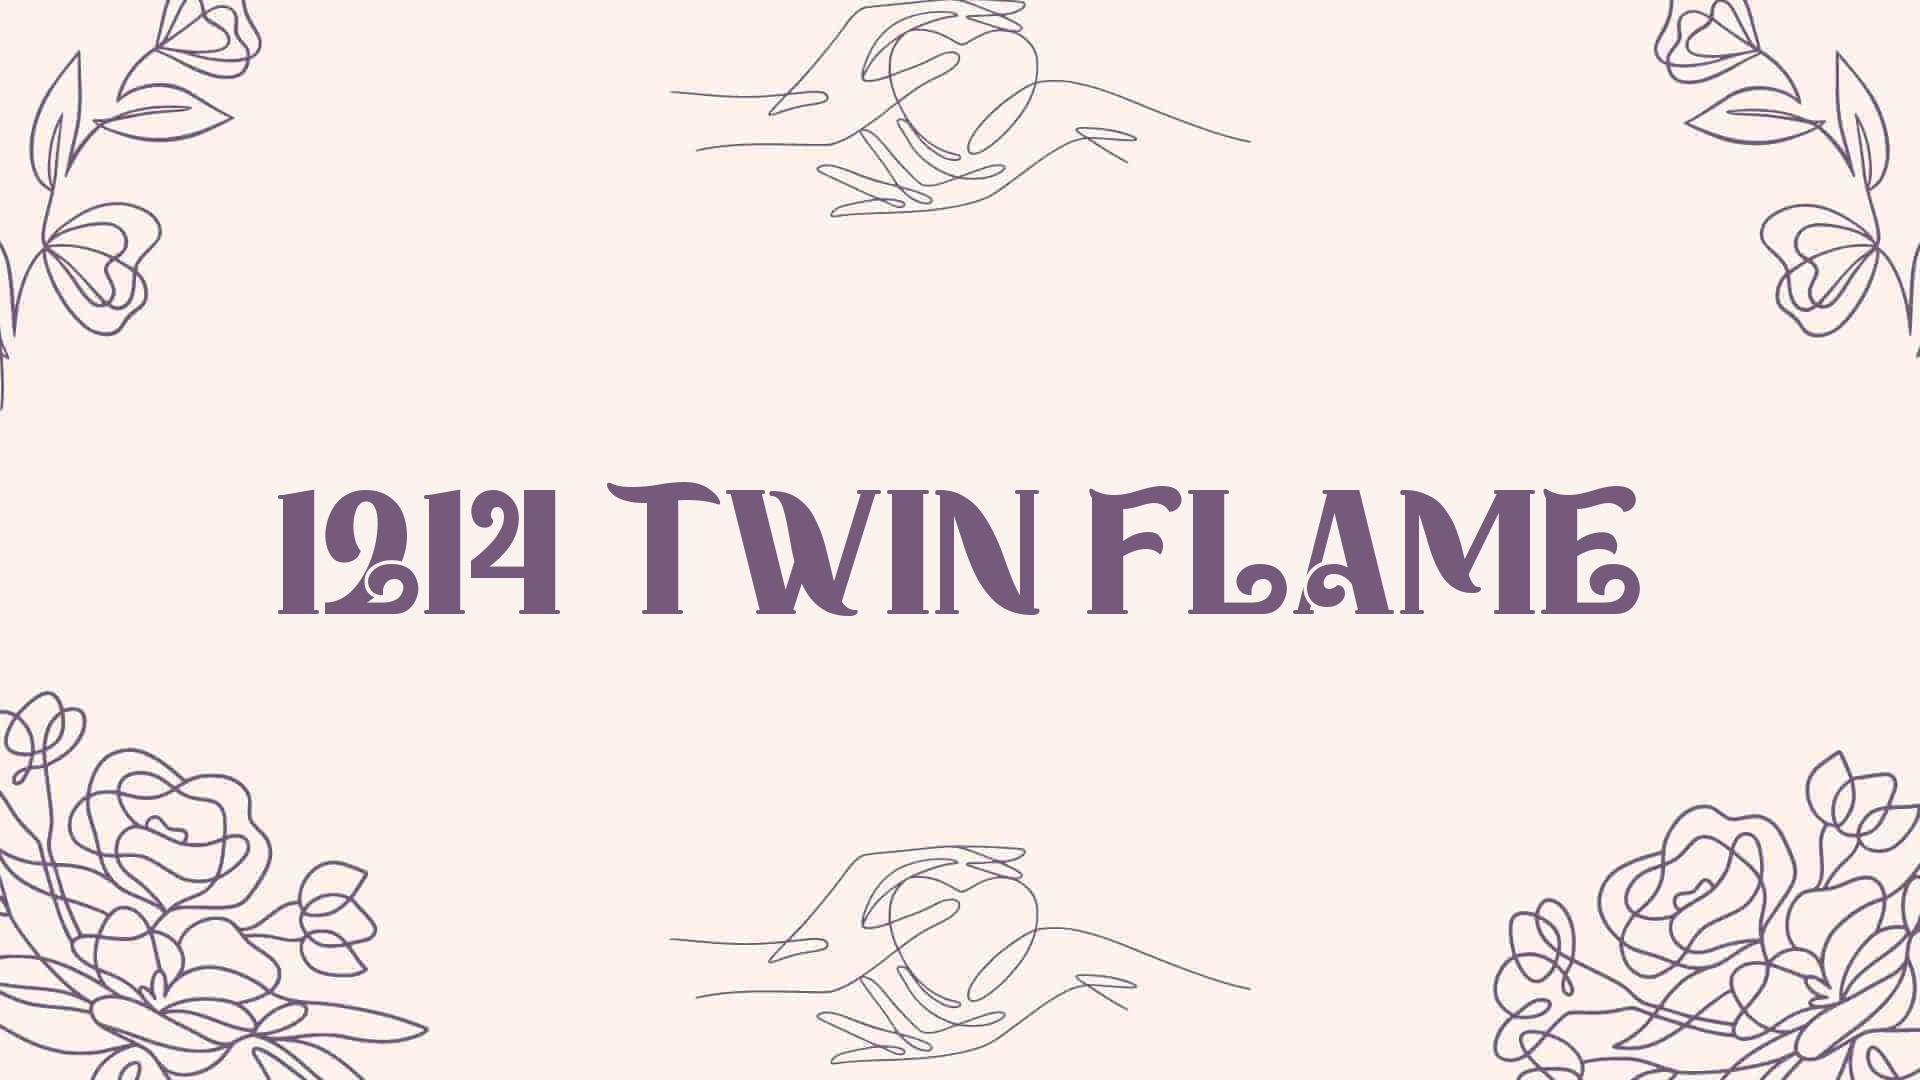 1214 twin flame [ Meaning Revealed ]